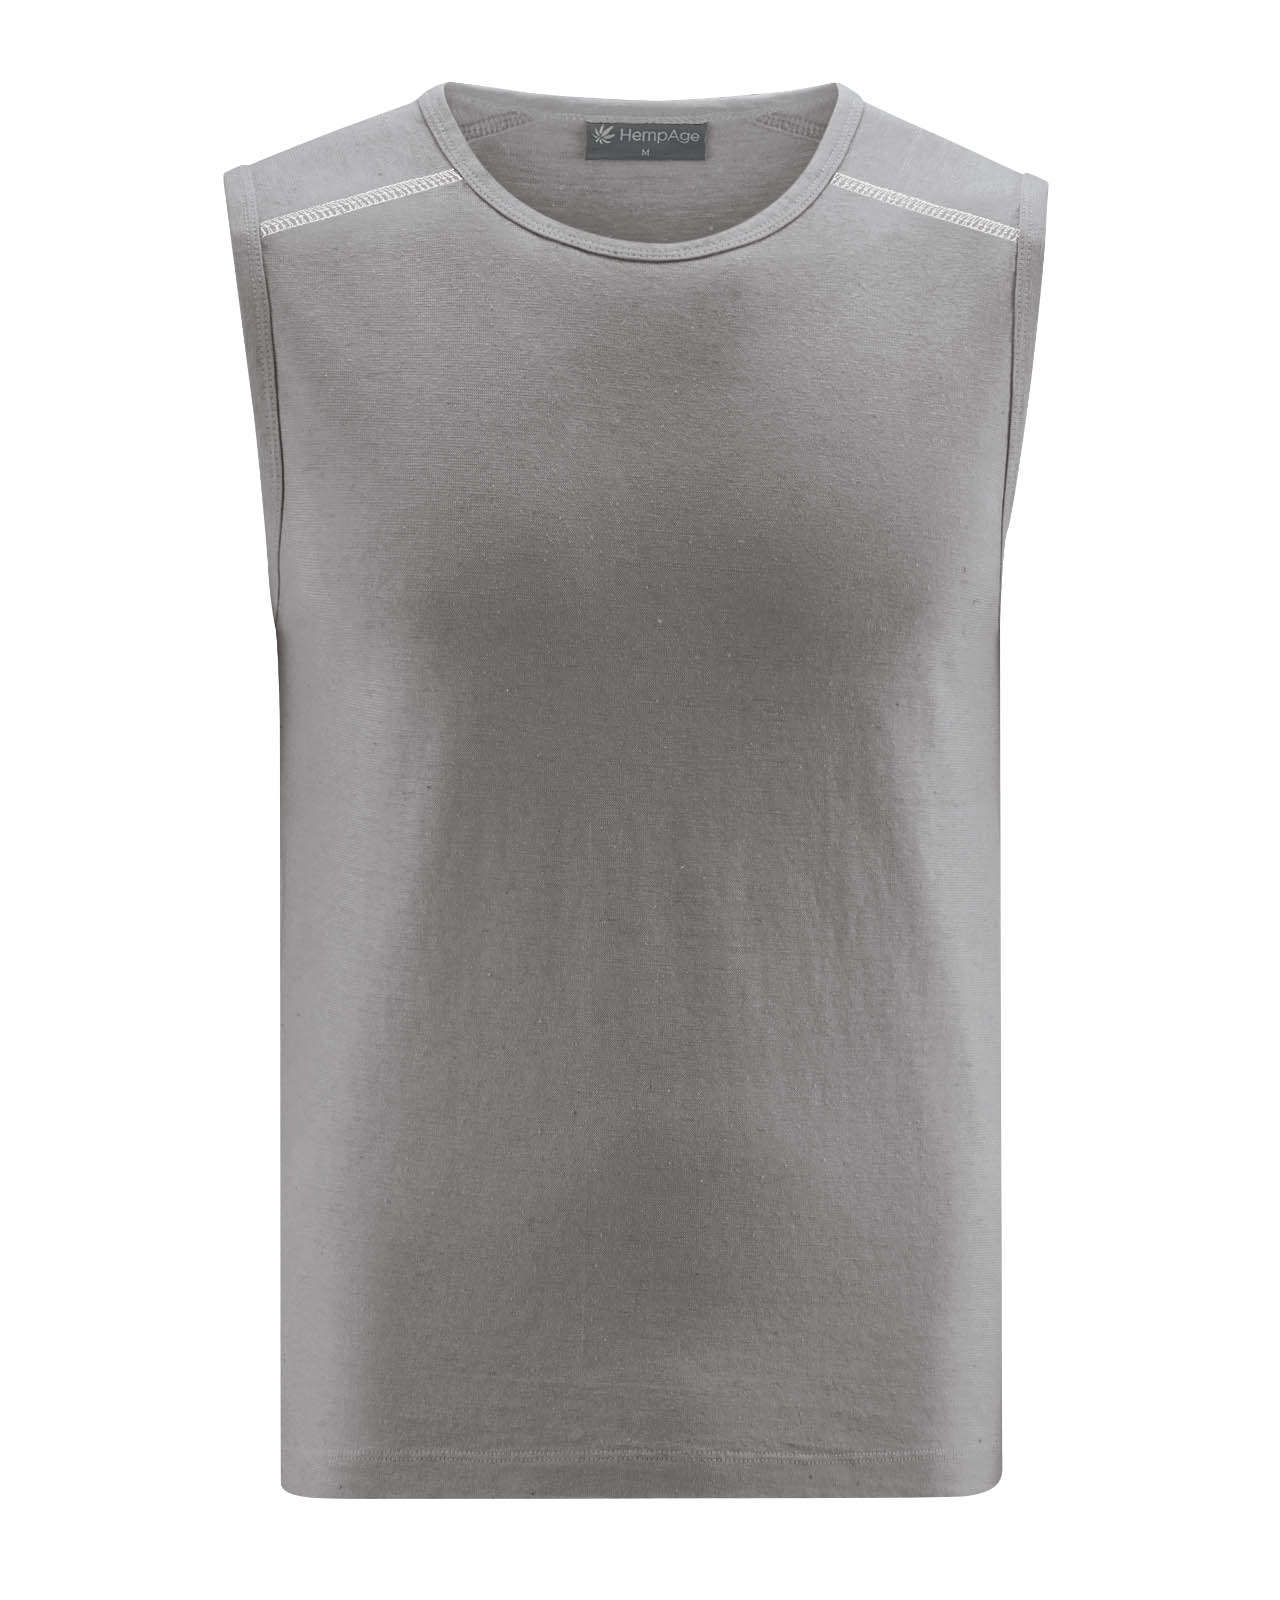 t-shirt yoga homme DH813_a_taupe